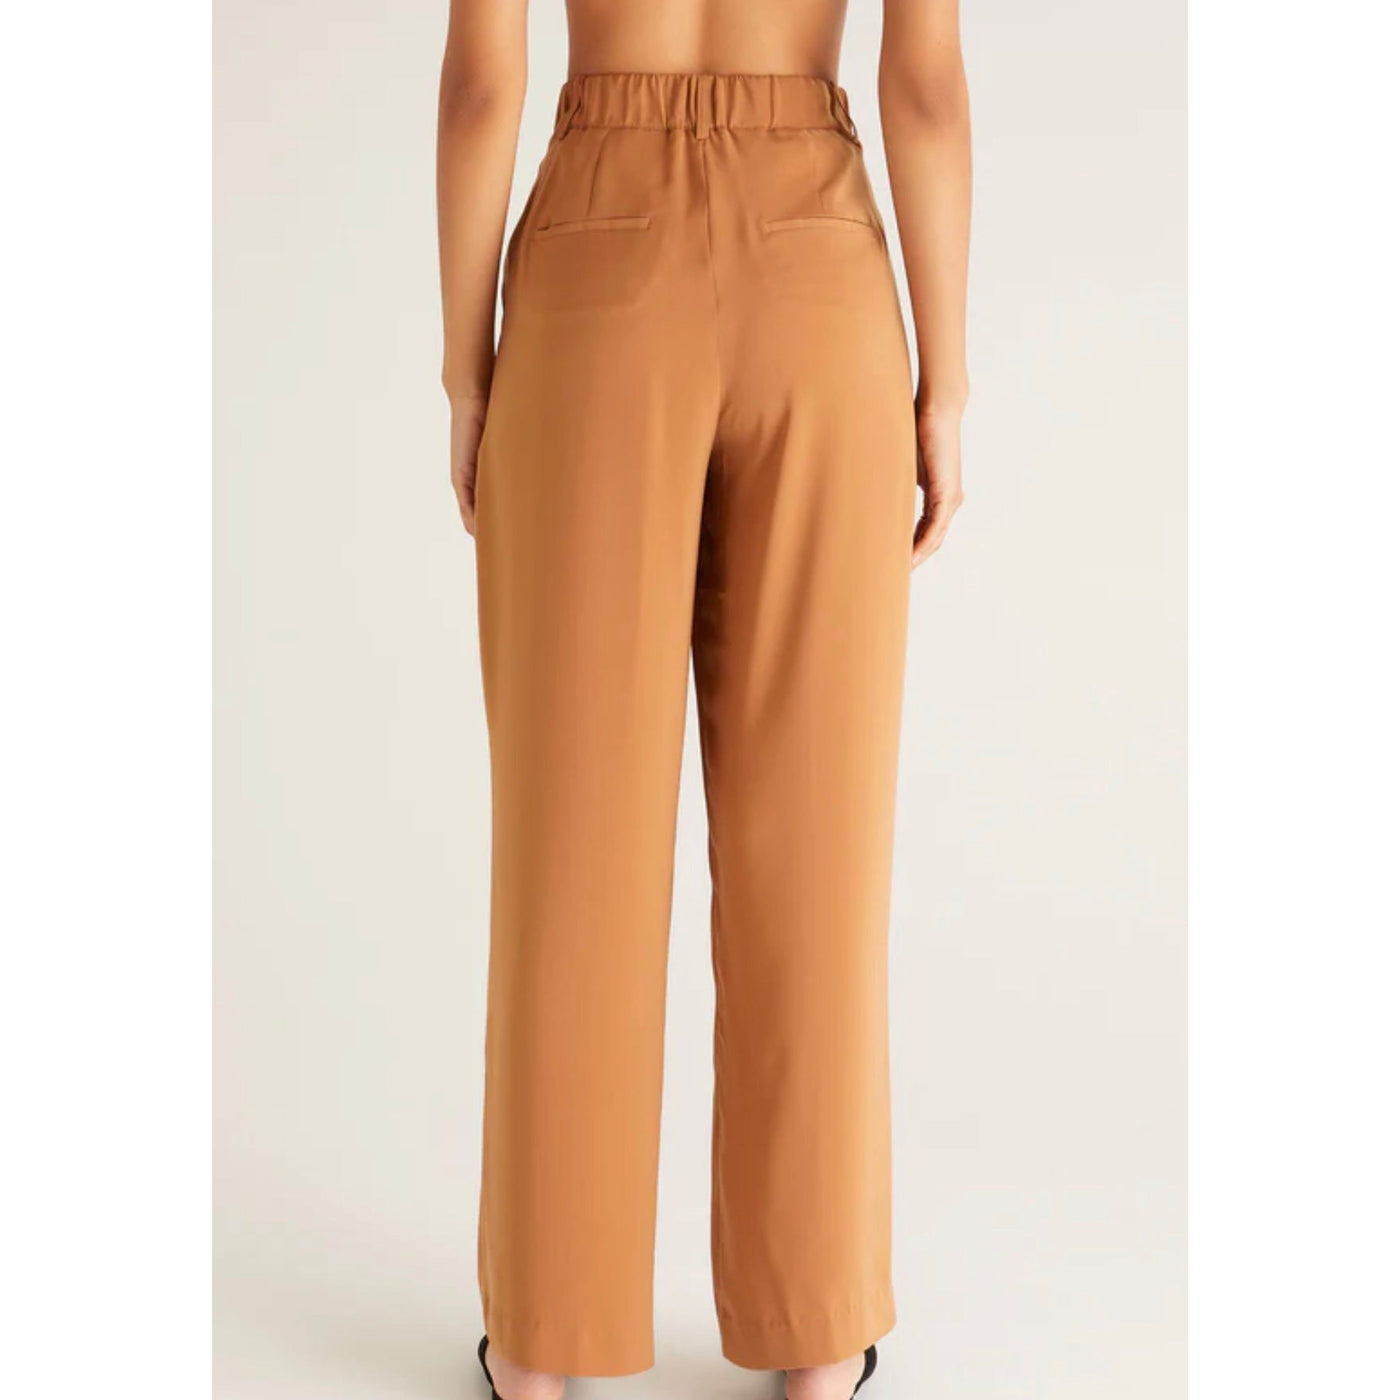 Z Supply Lucy Twill Pant - Available in Ecru & Camel Brown